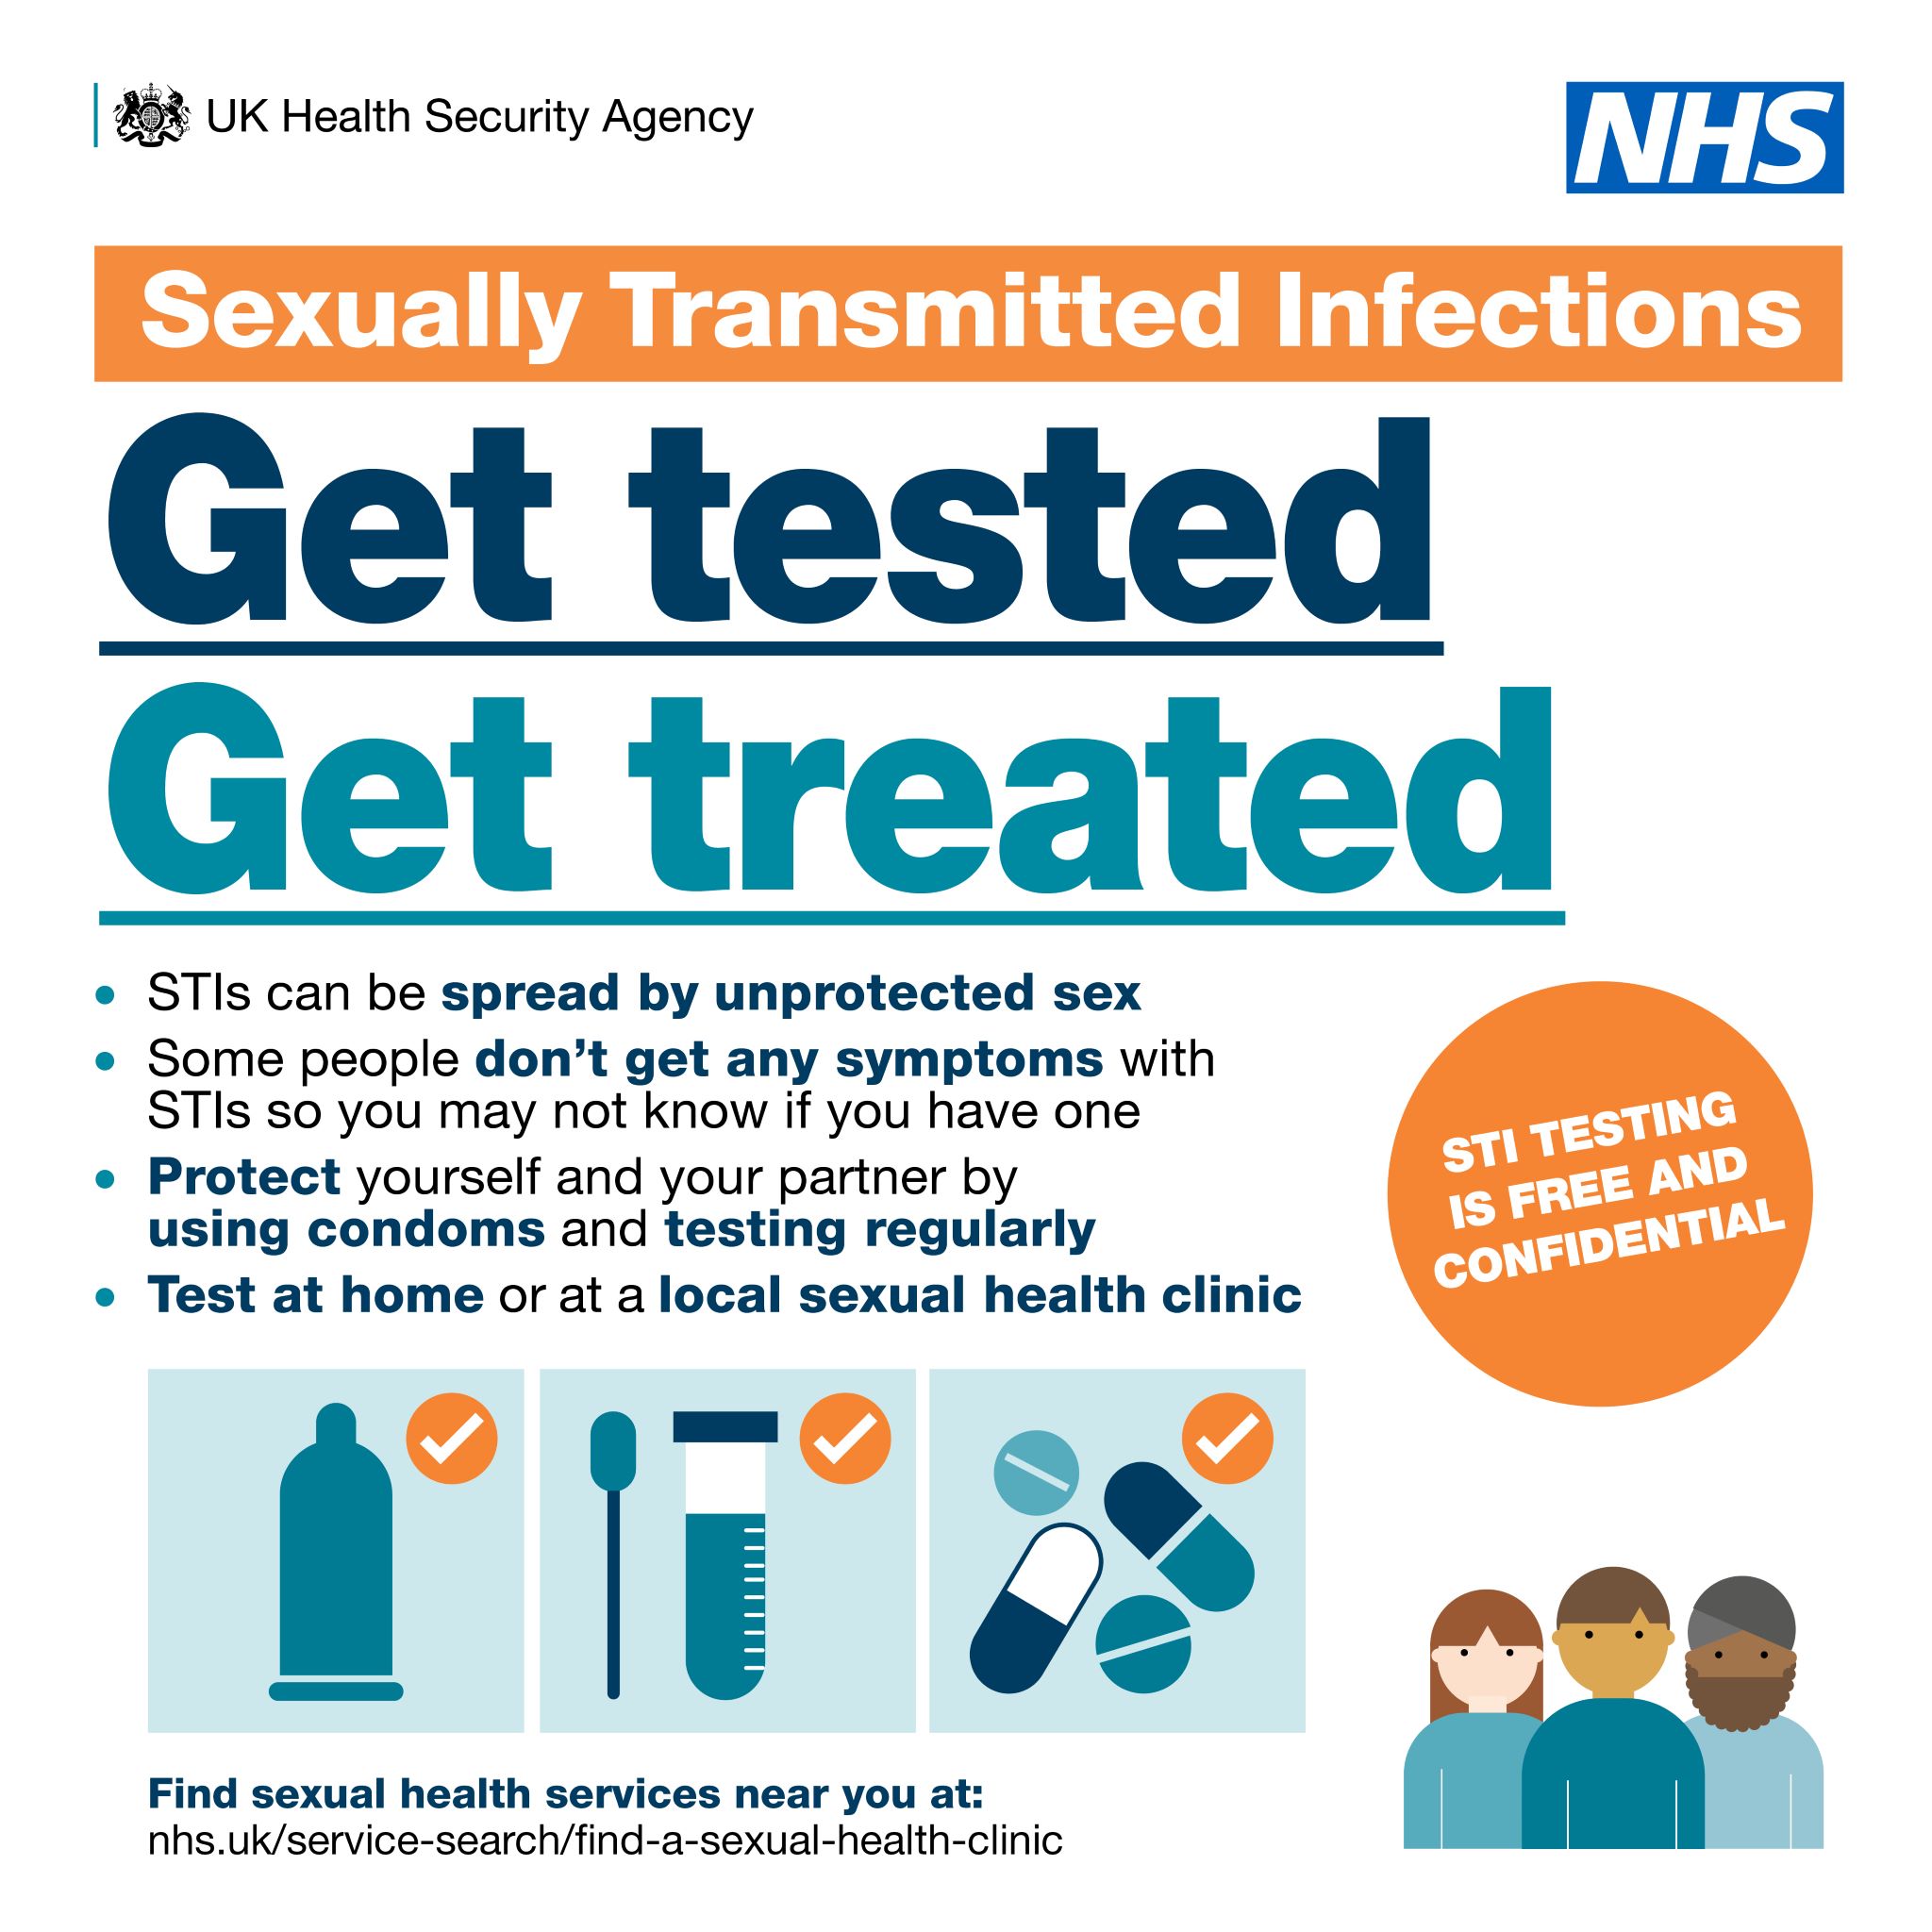 STI Testing is free and confidential picture